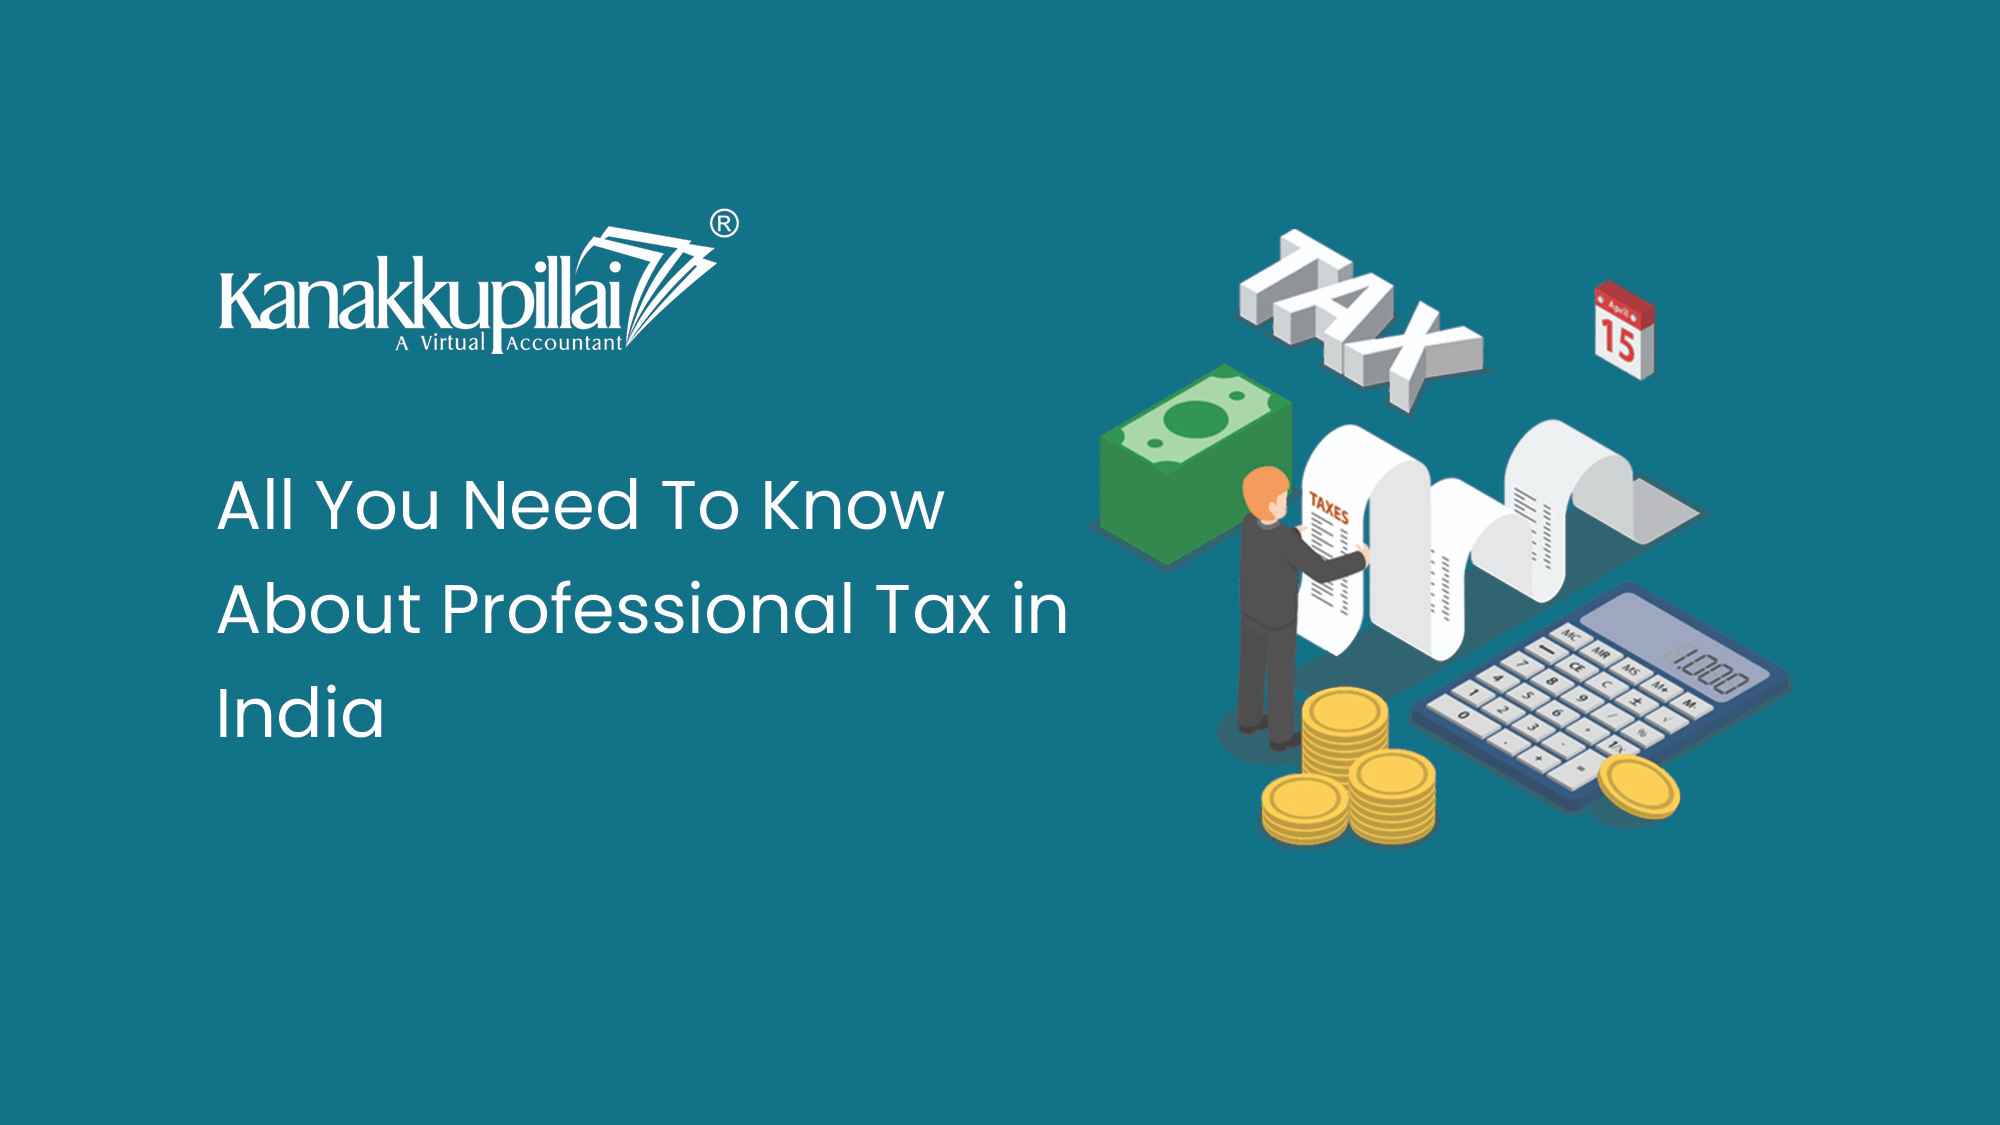 All You Need To Know About Professional Tax in India